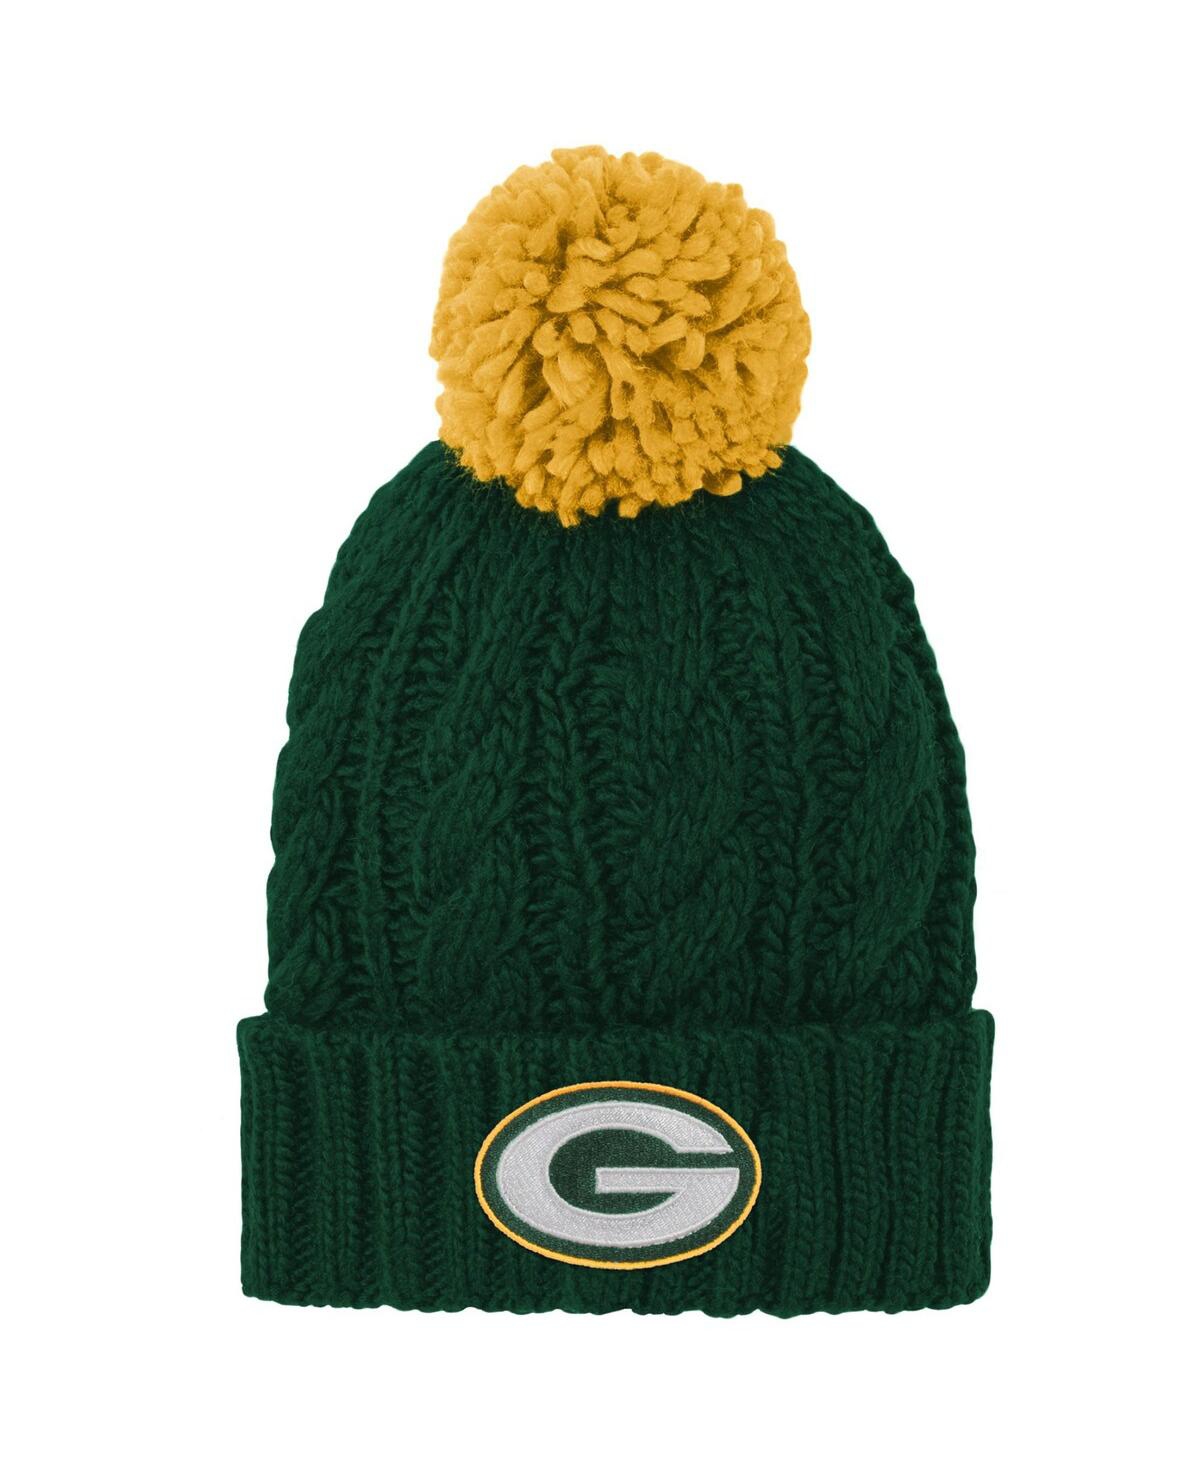 Outerstuff Kids' Youth Boys And Girls Green Green Bay Packers Team Cable Cuffed Knit Hat With Pom